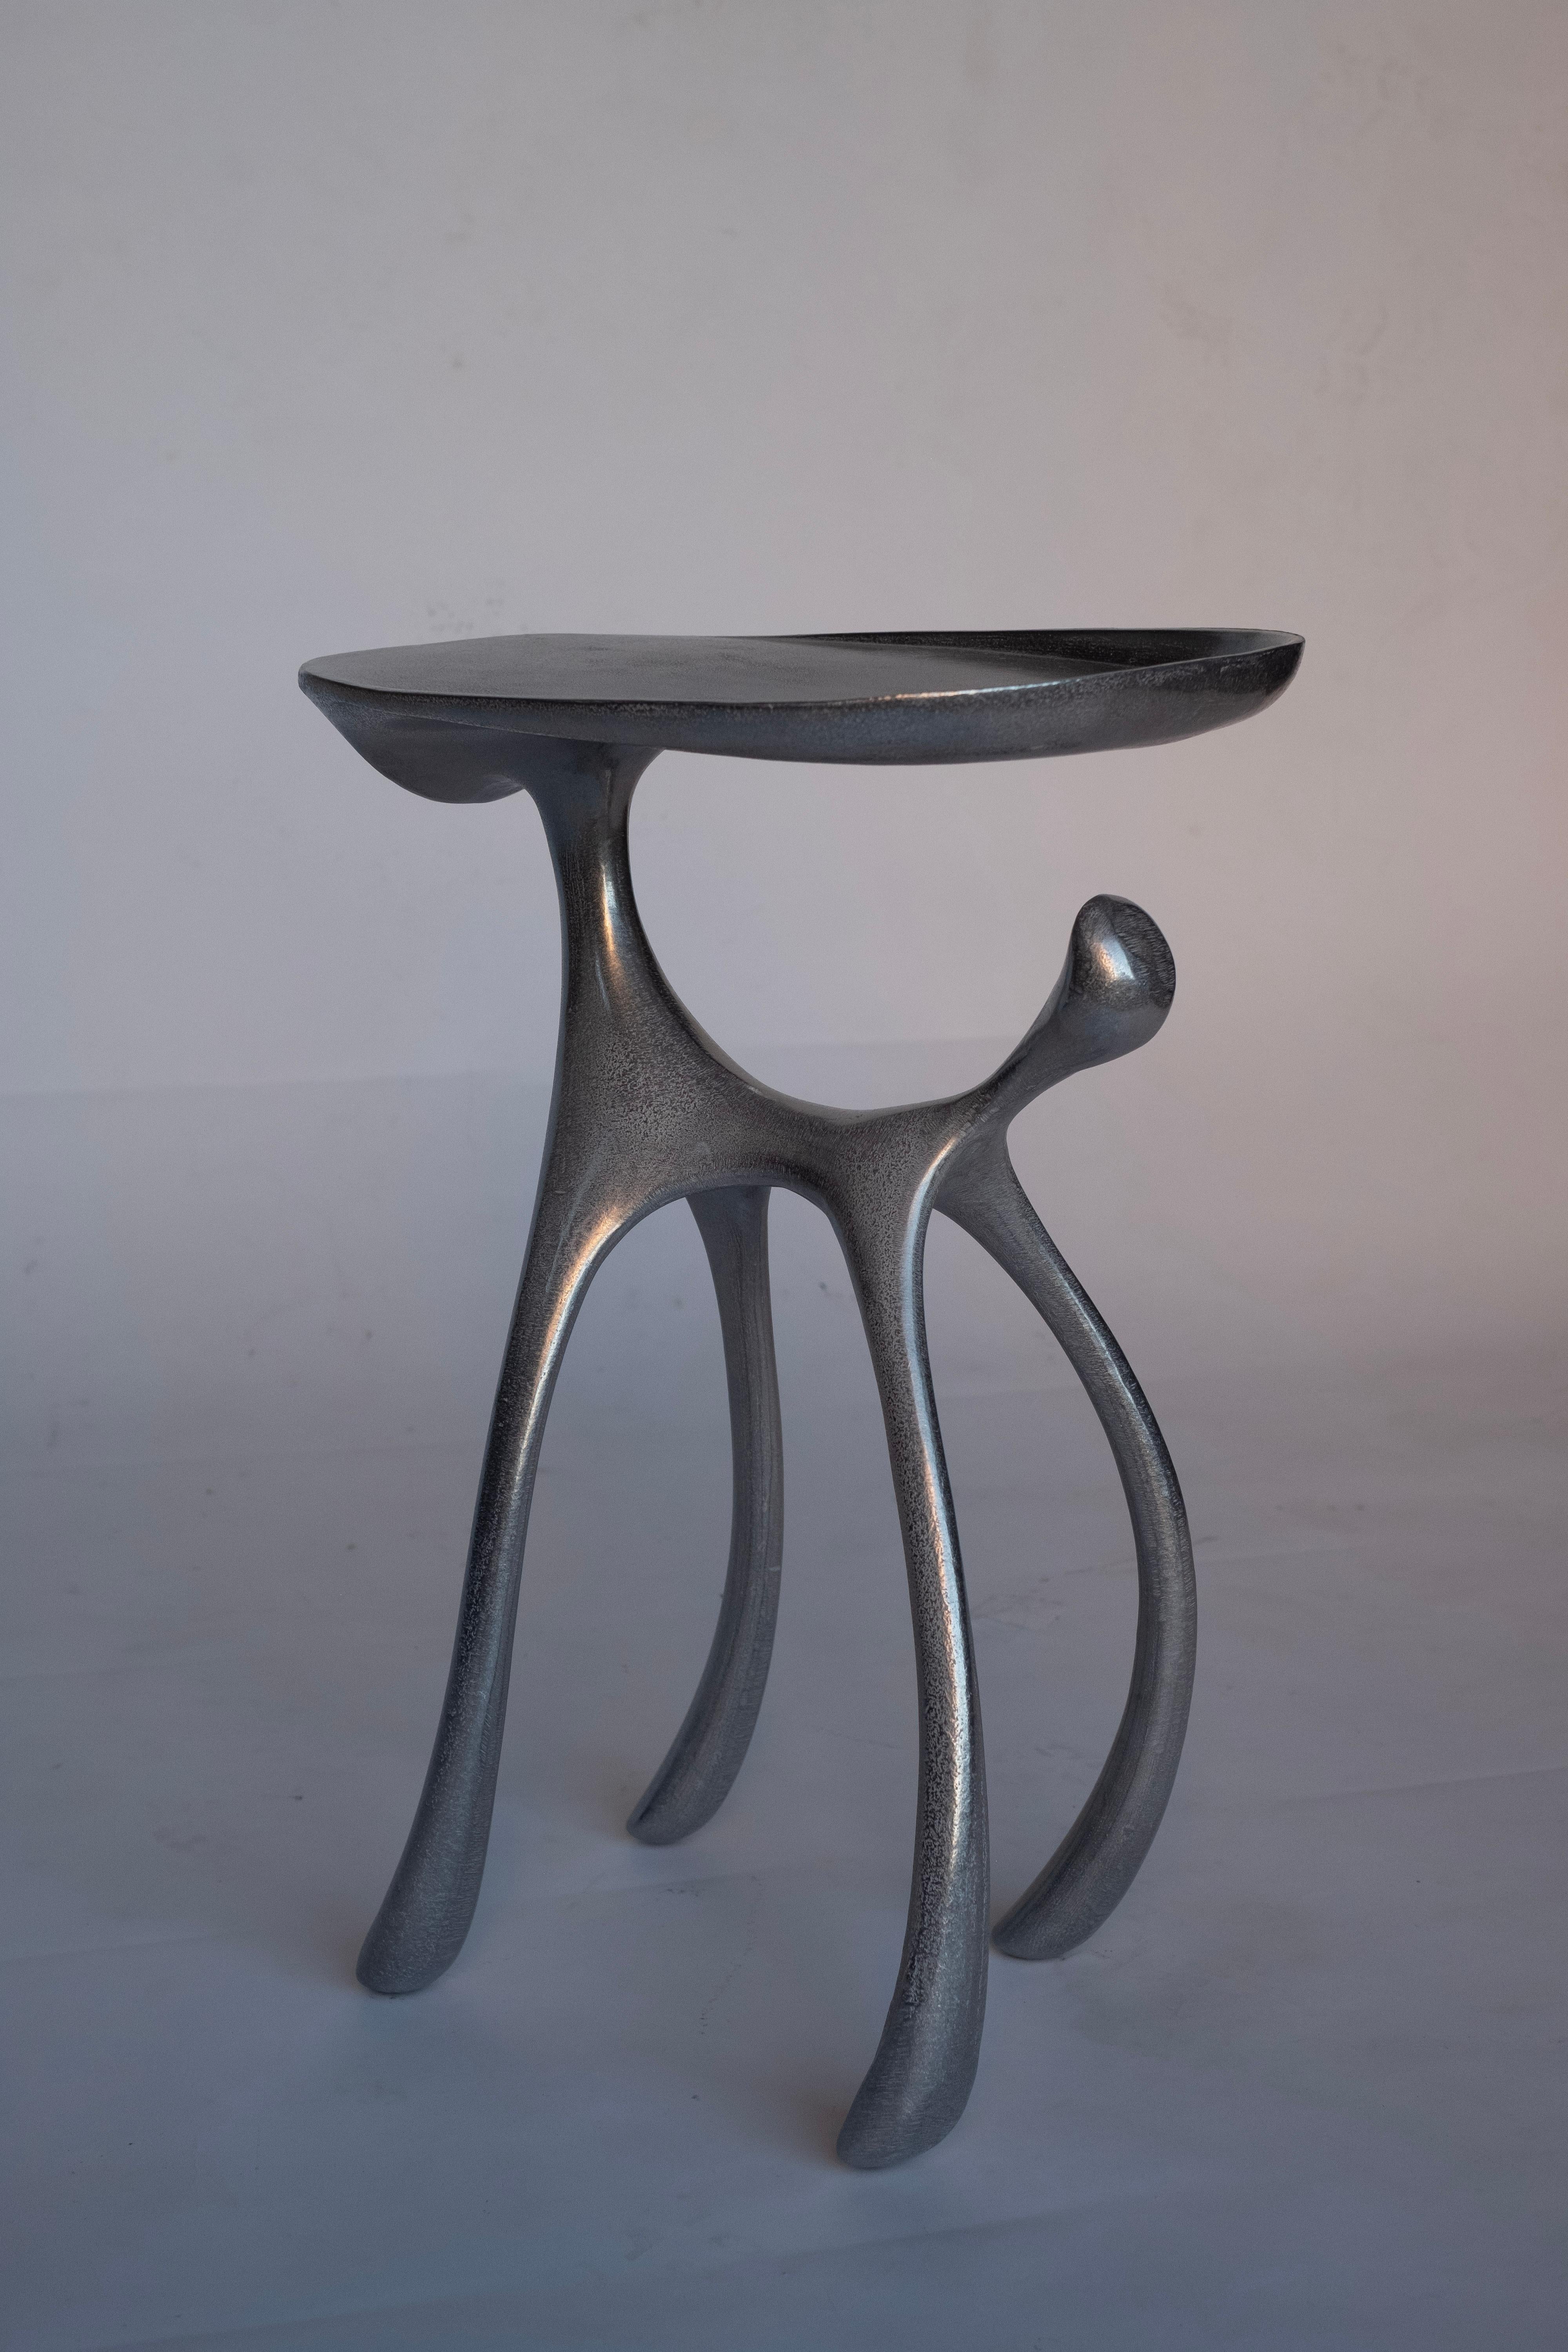 Jordan Mozer (b.1958), Creature Side Table / Occasional Table, Hand-Carved Cast Aluminum with Burnished Finish, Chicago, USA, 2008. Signed. Measures: 17.5